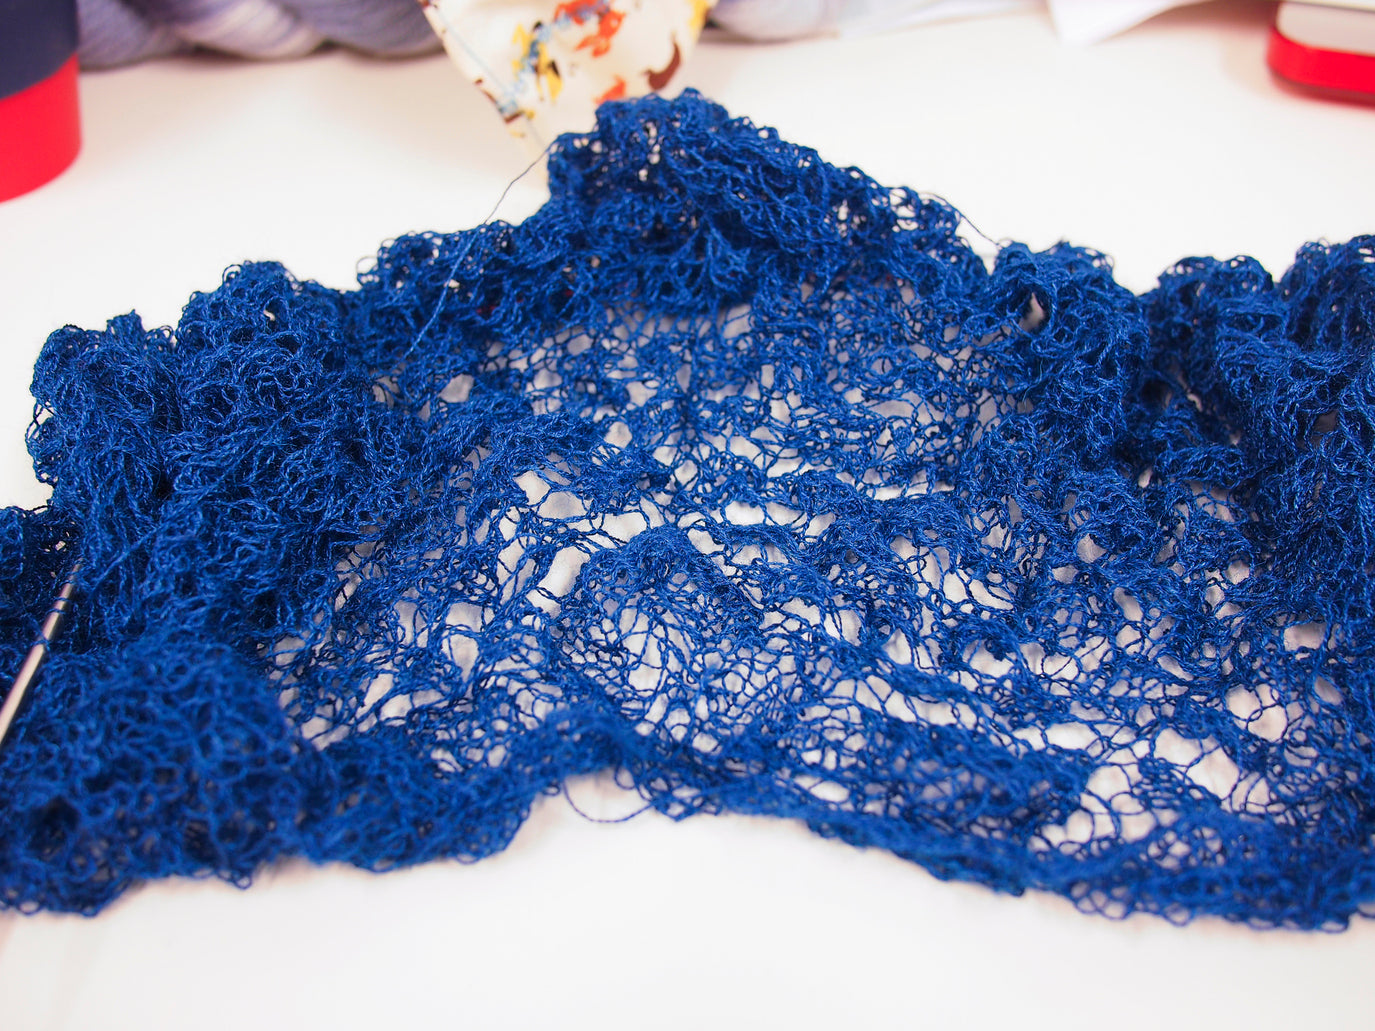 How to block lace knitting - Gathered